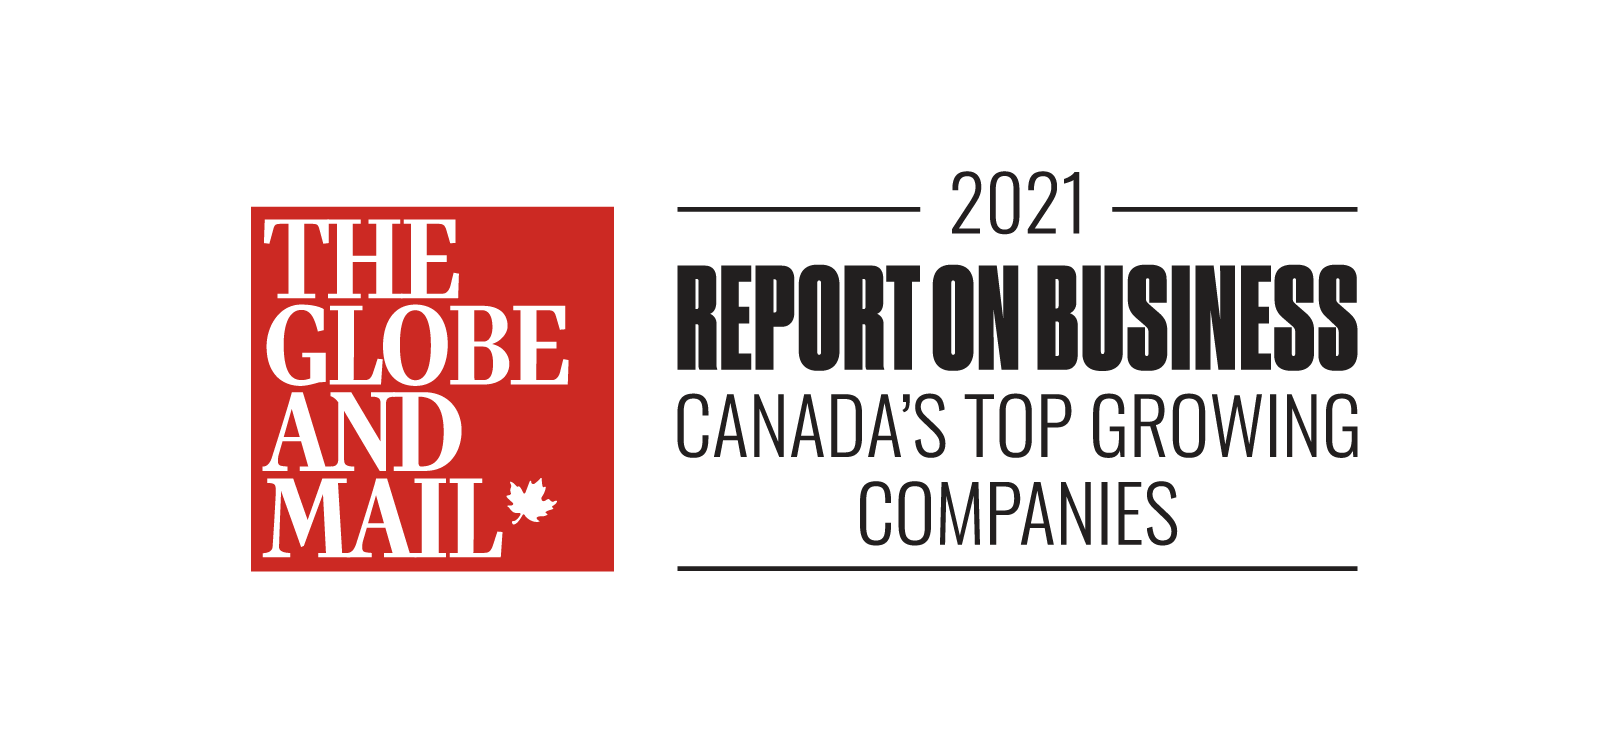 NOVARC TECHNOLOGIES NAMED TO THE GLOBE AND MAIL’S 2021 RANKING OF CANADA’S TOP GROWING COMPANIES